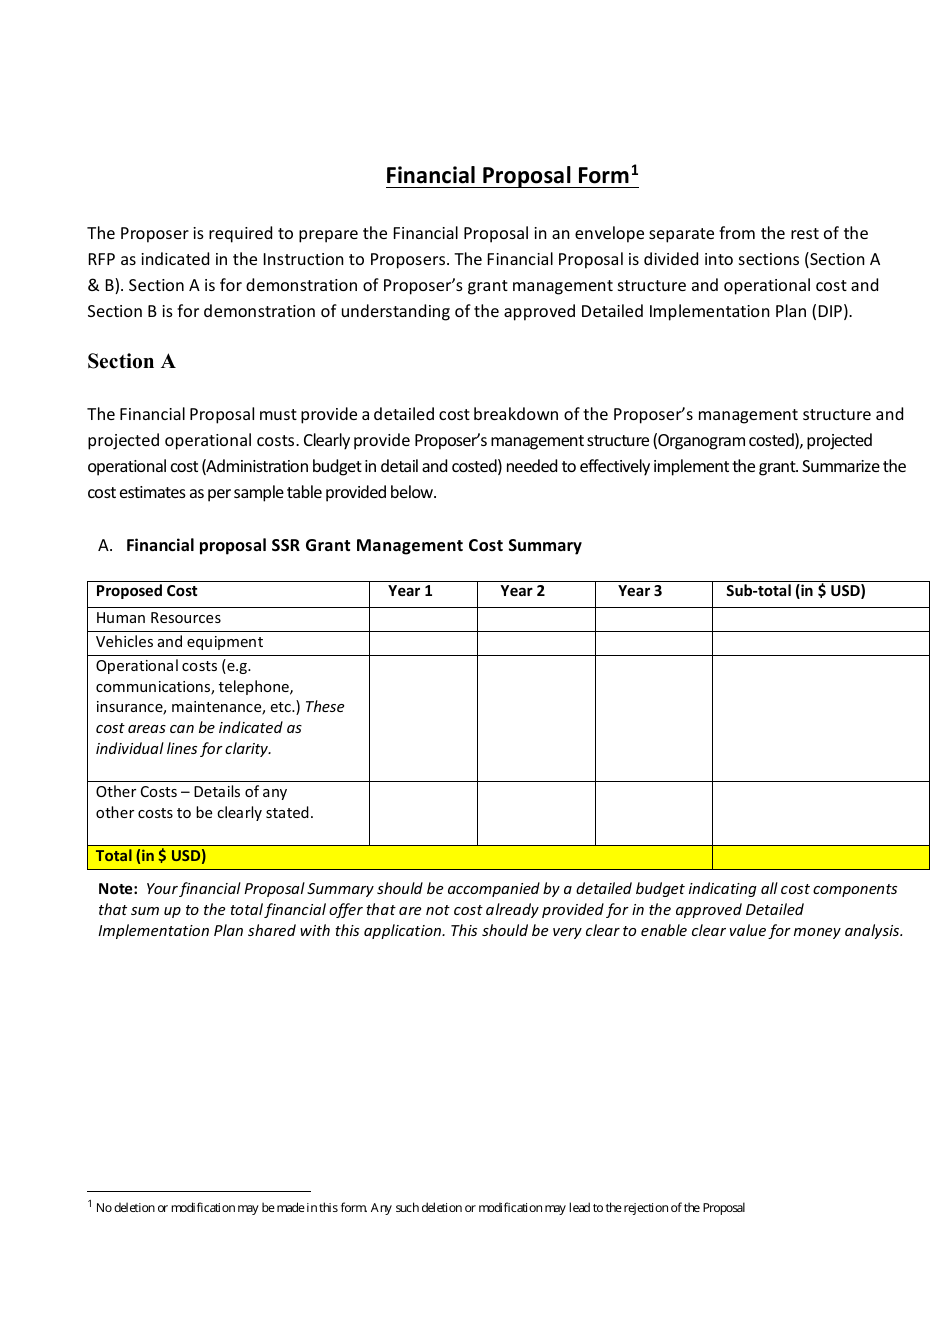 Financial Proposal Form Fill Out, Sign Online and Download PDF